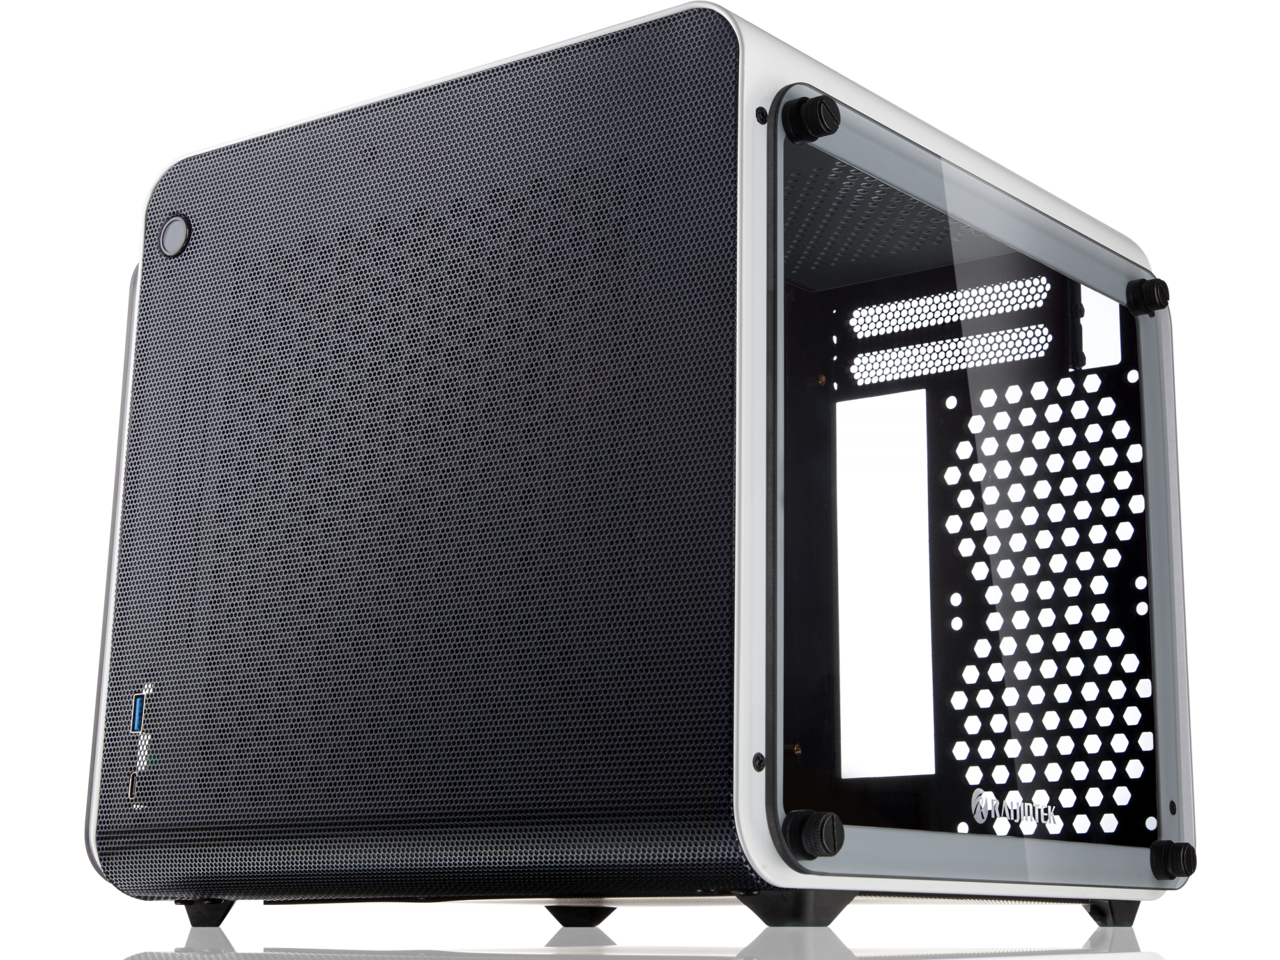 METIS EVO WHITE TGS, an Alu. ITX case with tempered glass, is designed to fulfill the smallest case built with ultra high air flow to solve all thermal issue of SFF chassis, 200mm fan option at front.